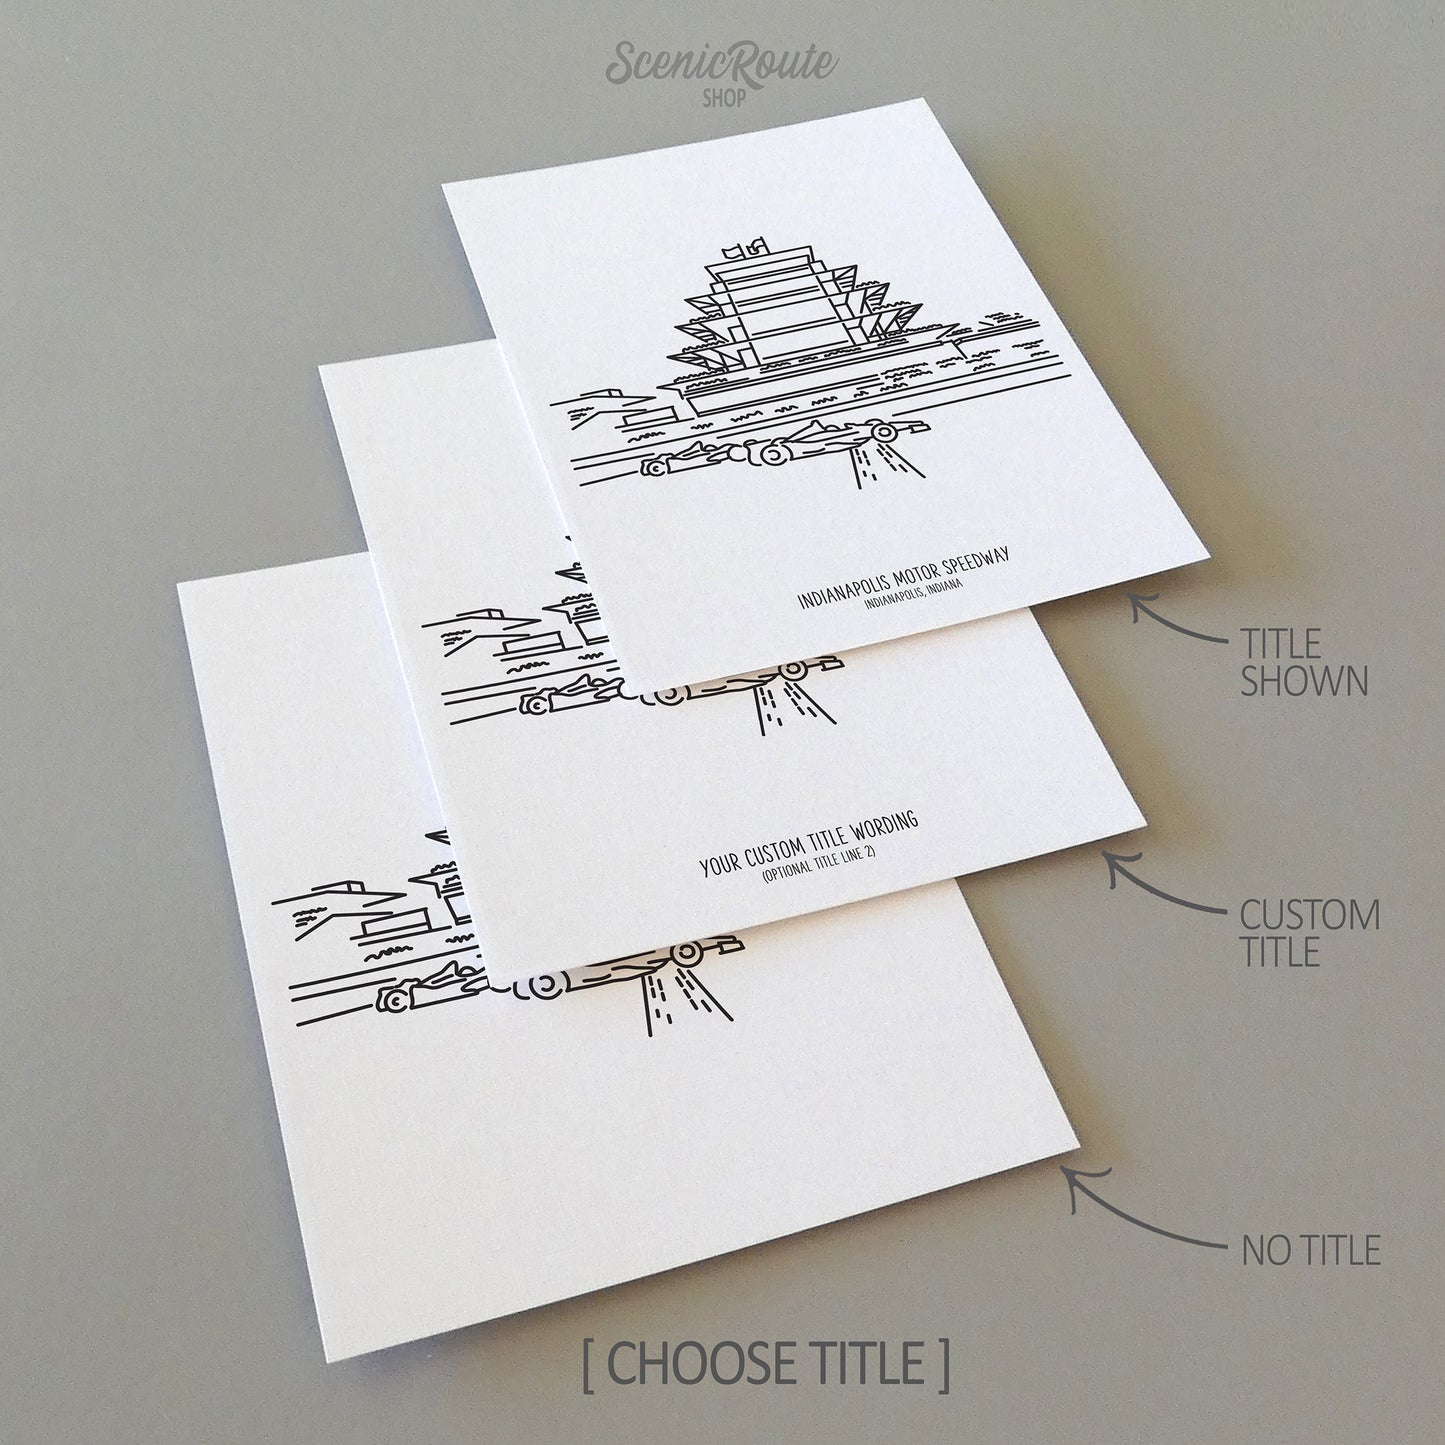 Three line art drawings of the Indianapolis Speedway Pagoda on white linen paper with a gray background.  The pieces are shown with title options that can be chosen and personalized.